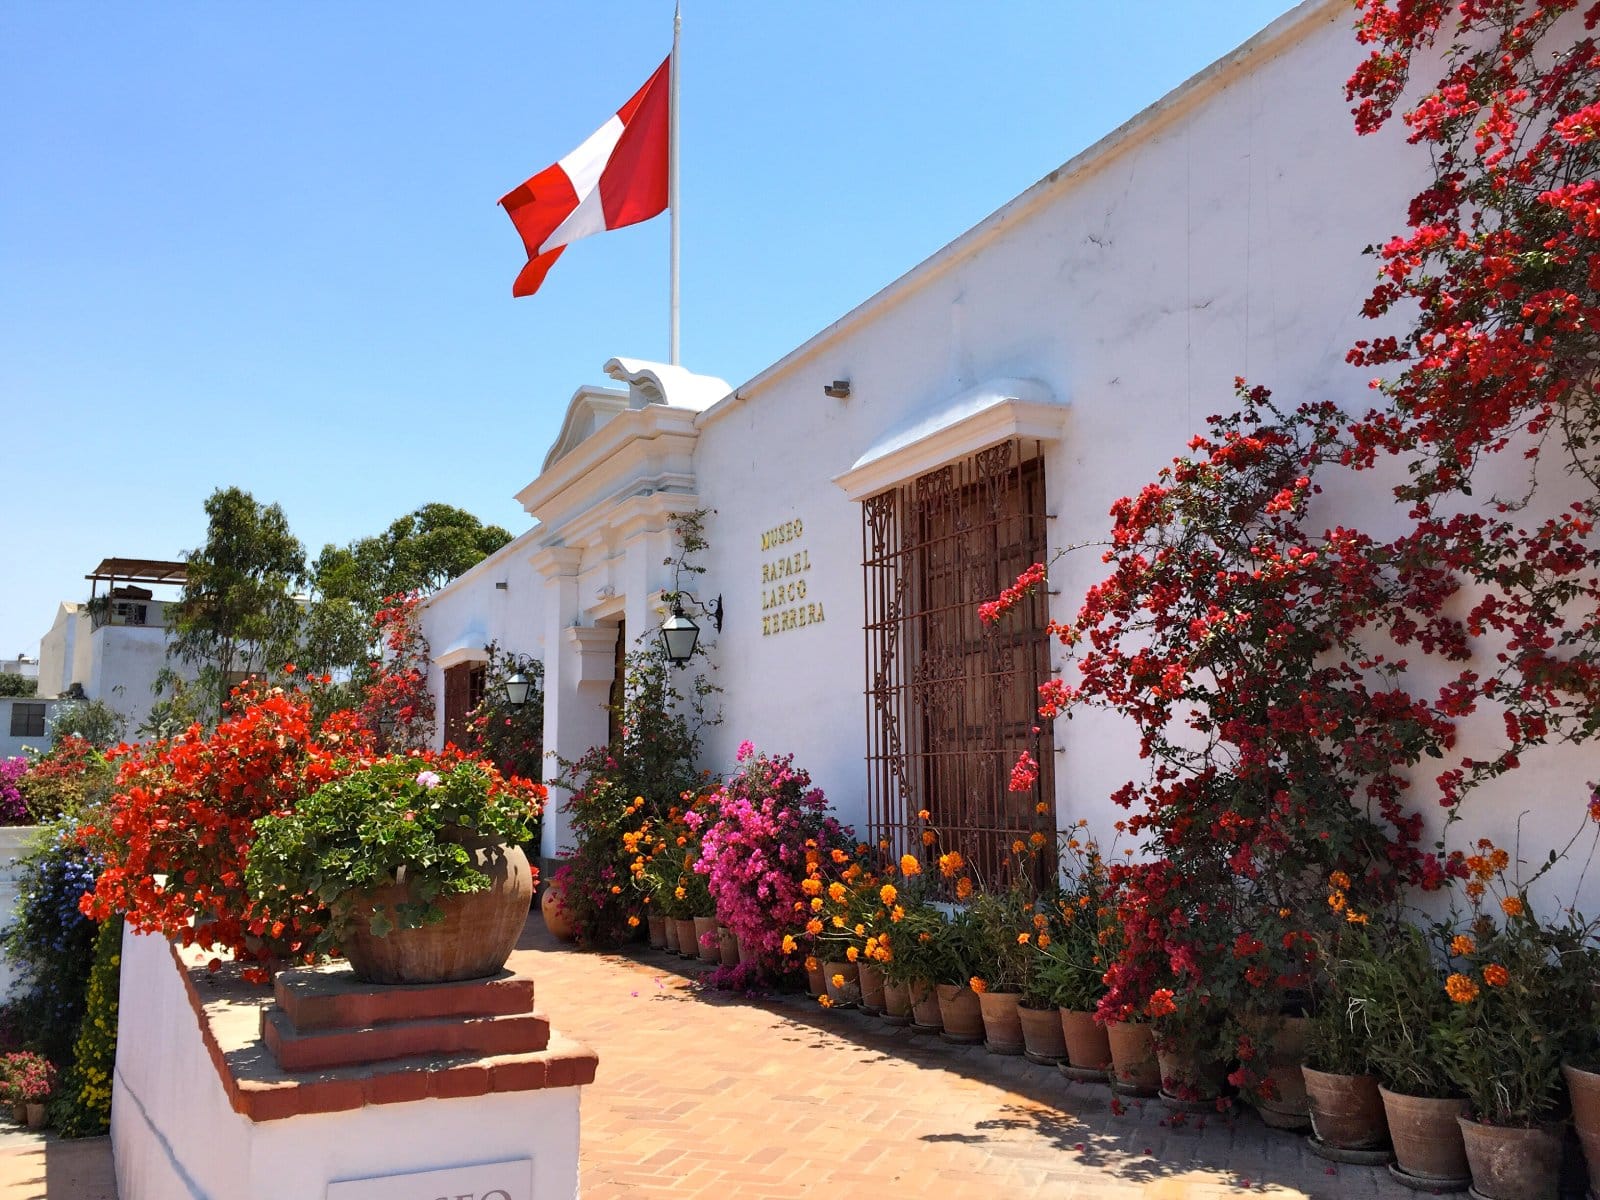 <p class="wp-caption-text">Image Credit: Shutterstock / Amy Corti</p>  <p><span>The Larco Museum is housed in an 18th-century vice-royal building and is surrounded by beautiful gardens. It offers a comprehensive overview of 5,000 years of Peruvian pre-Columbian history. The museum’s collection includes over 45,000 artifacts from various indigenous cultures, including textiles, ceramics, and gold and silver pieces.</span></p> <p><span>The Erotic Gallery, showcasing pre-Columbian erotic pottery, is one of the museum’s most talked-about exhibits. The on-site café in the museum’s gardens is a perfect spot to relax after exploring the collections.</span></p>